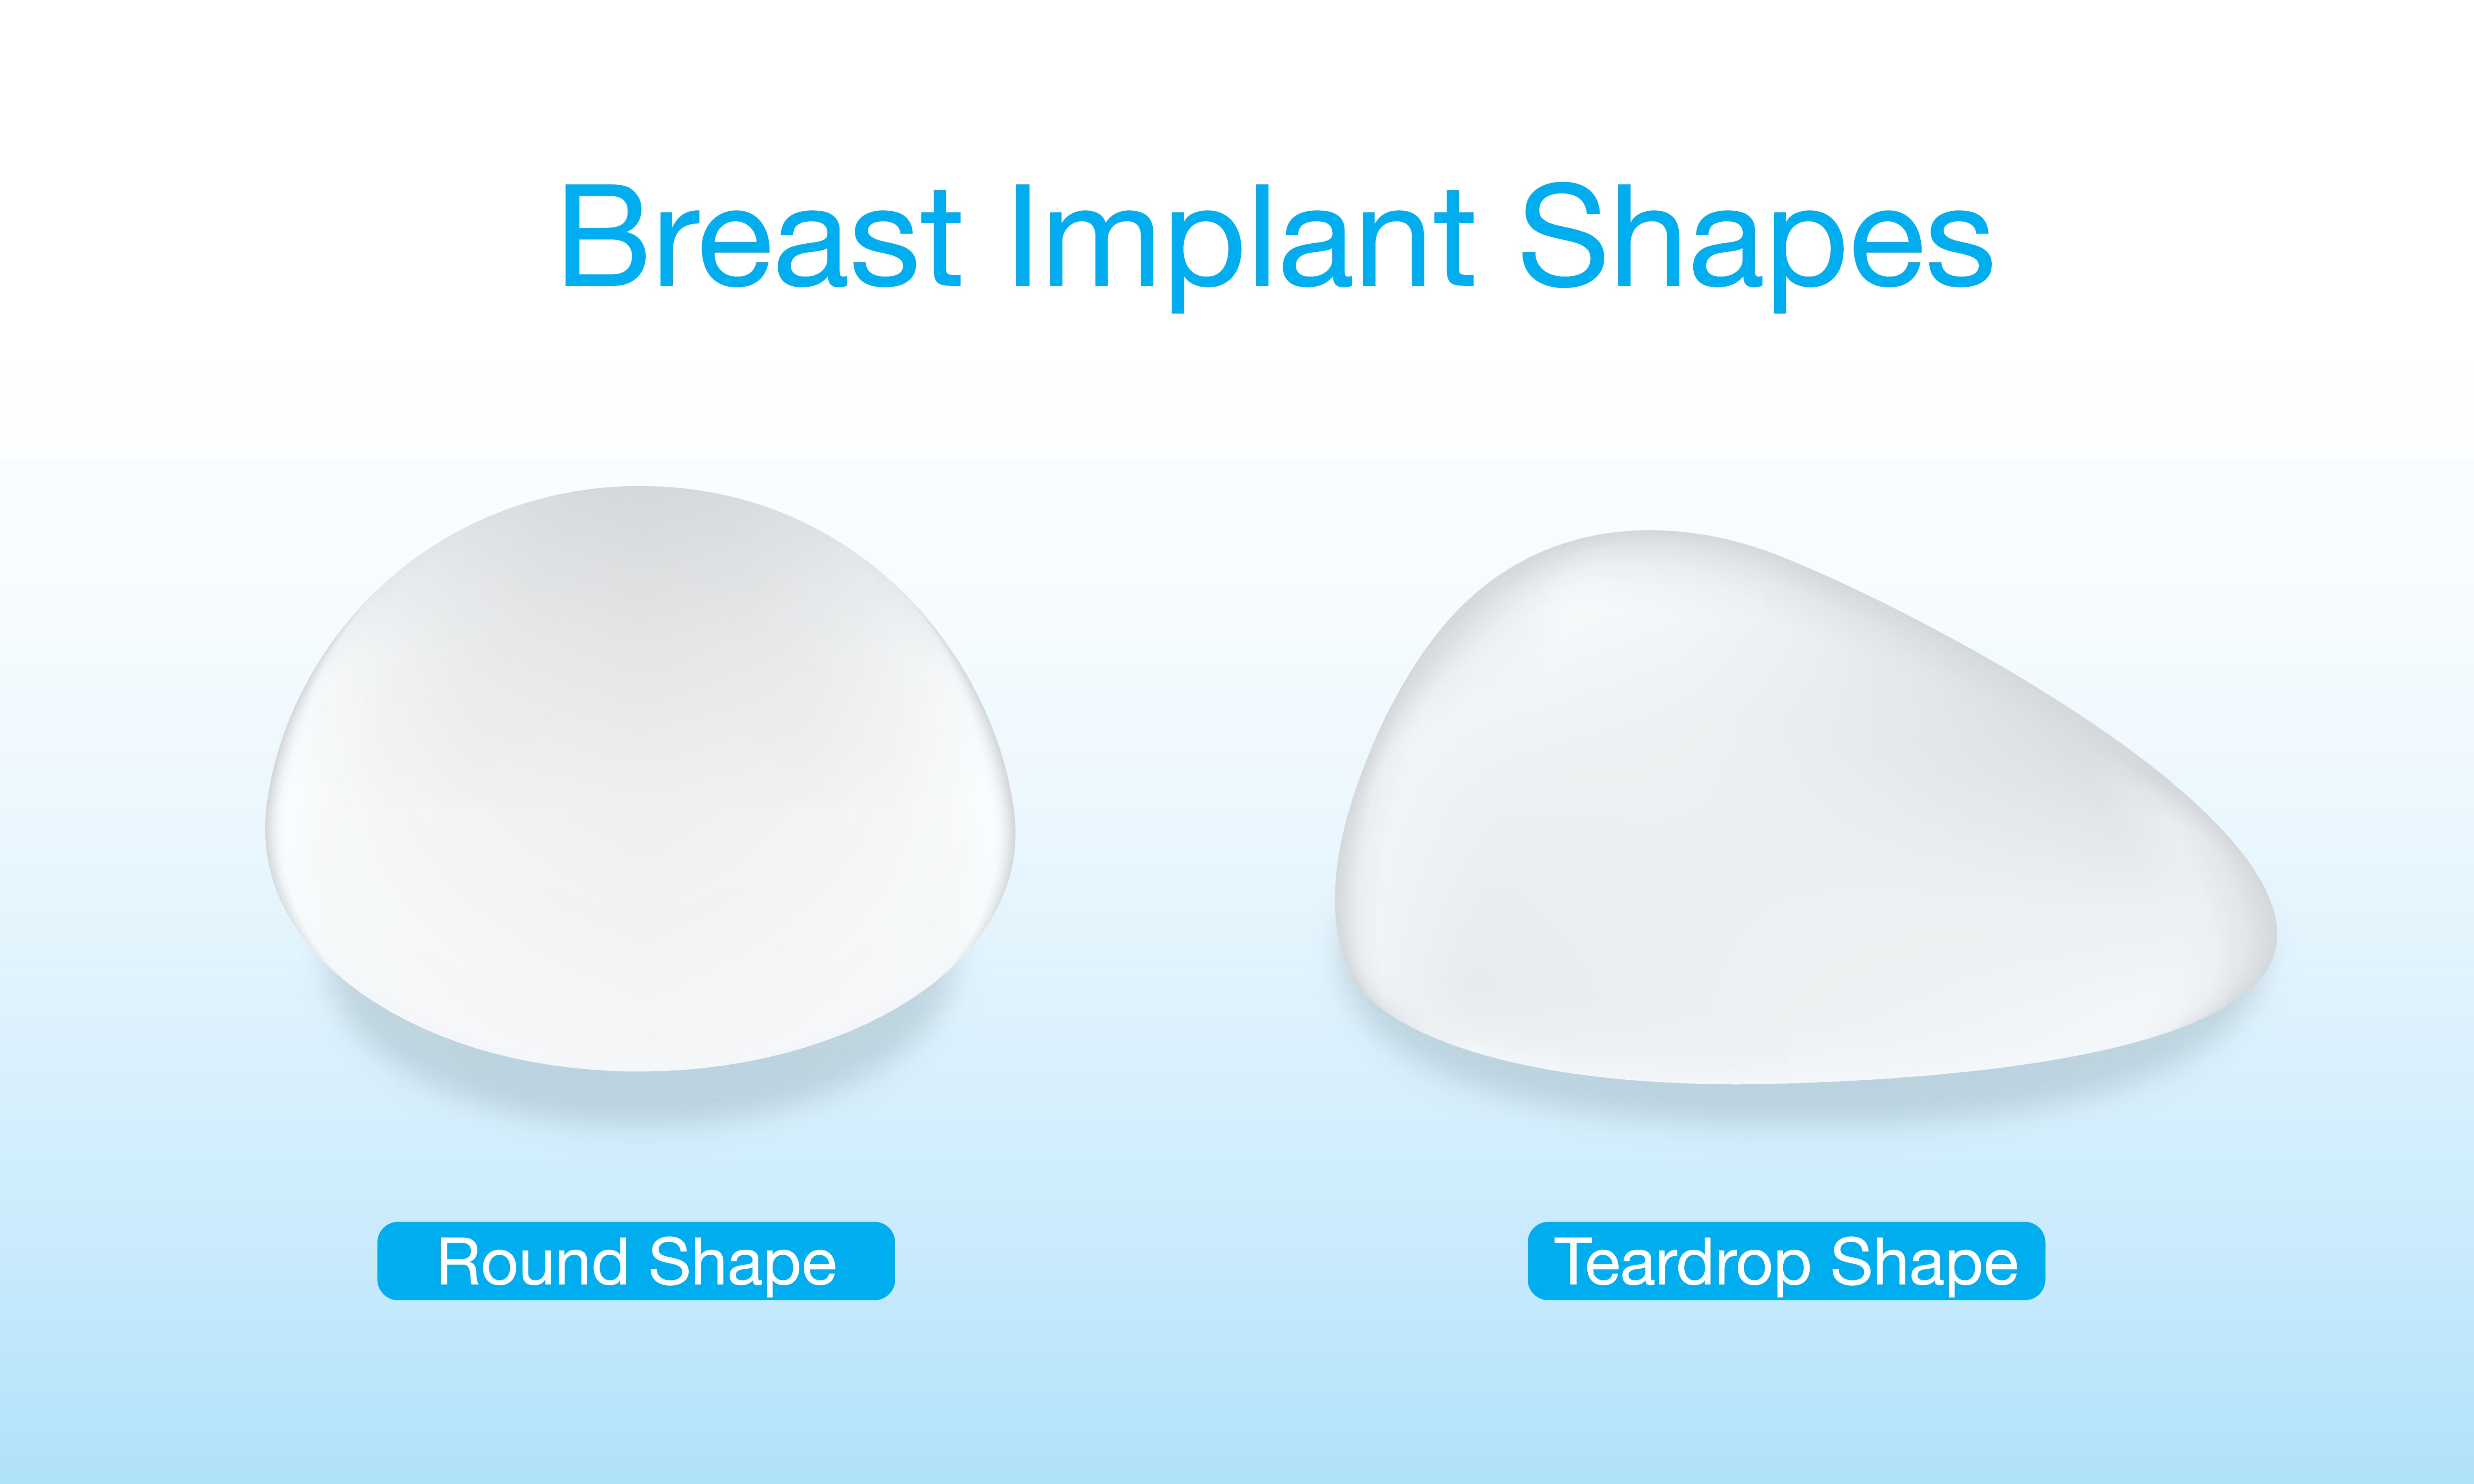 https://www.drhalpern.com/wp-content/uploads/2019/08/difference-of-breast-implant-round-and-teardrop-shapes-img-blog.jpg